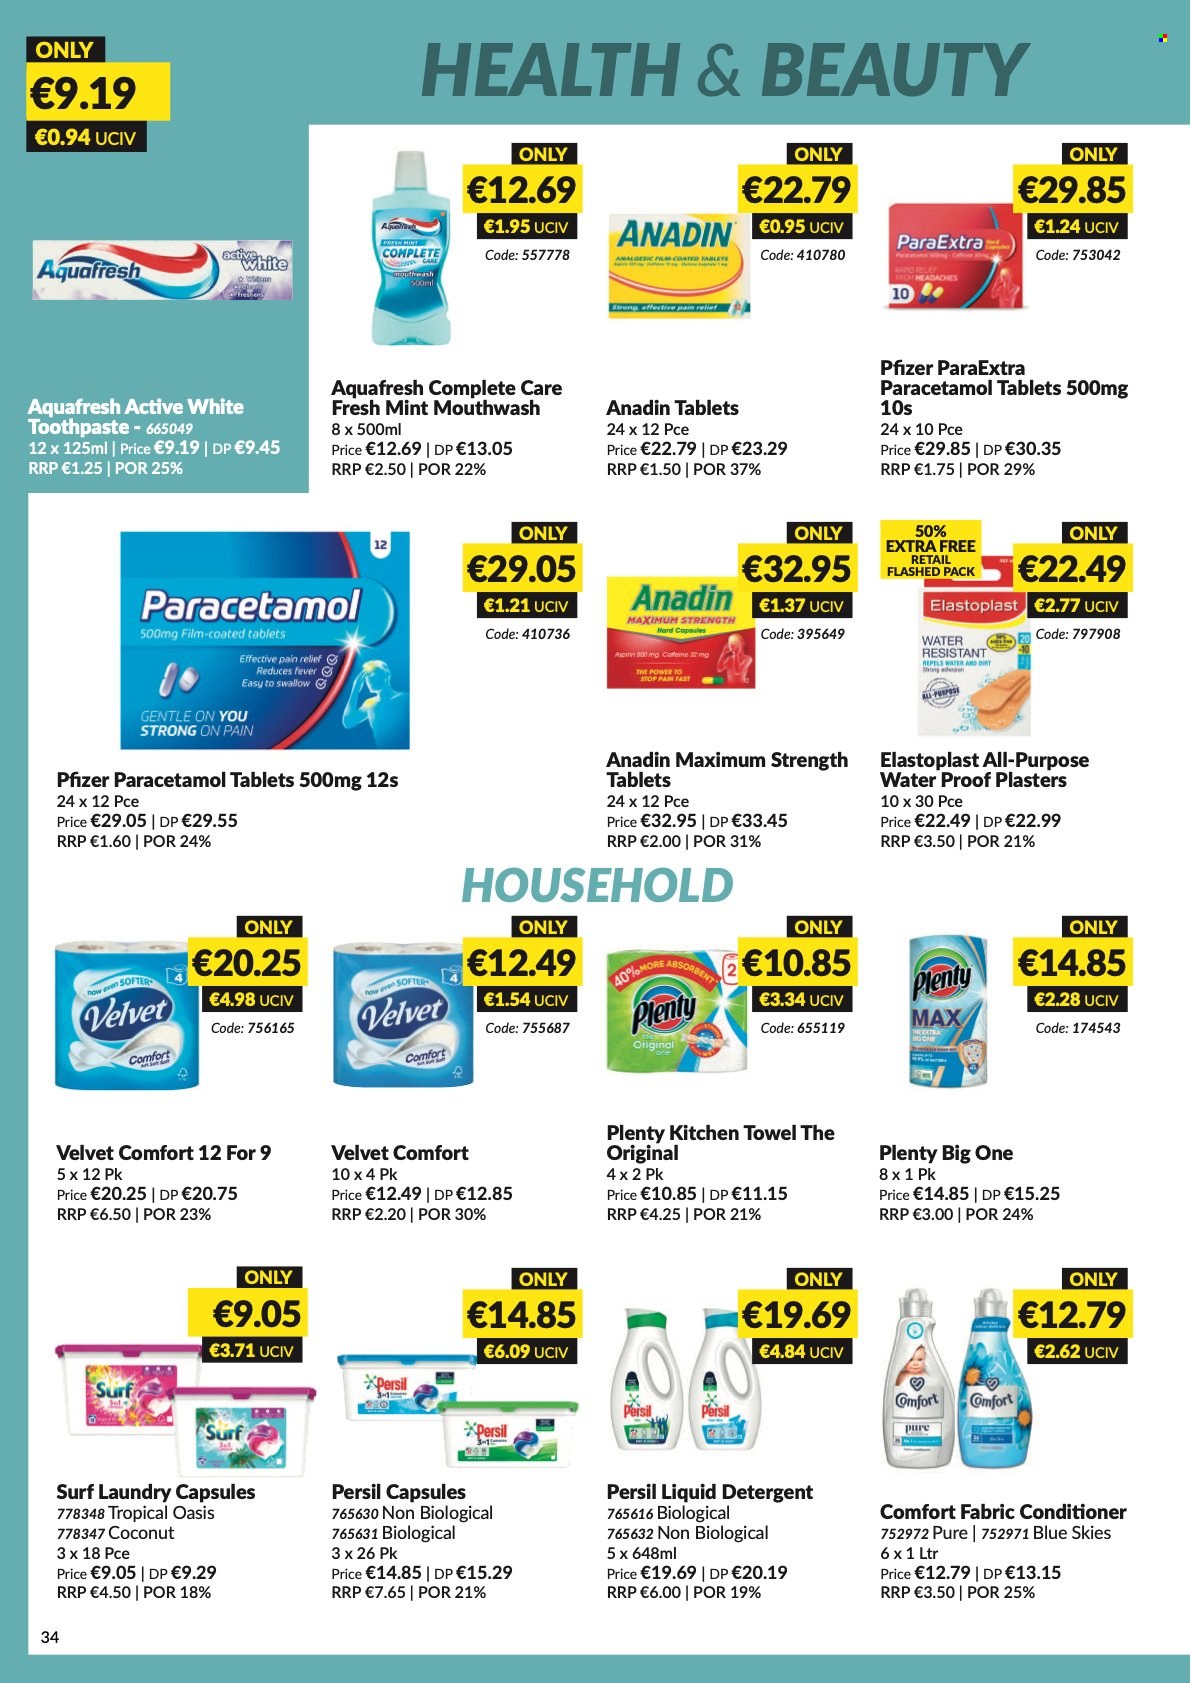 thumbnail - MUSGRAVE Market Place offer  - 08.05.2022 - 04.06.2022 - Sales products - coconut, Plenty, kitchen towels, detergent, Persil, liquid detergent, laundry capsules, Surf, Comfort softener, toothpaste, mouthwash. Page 35.